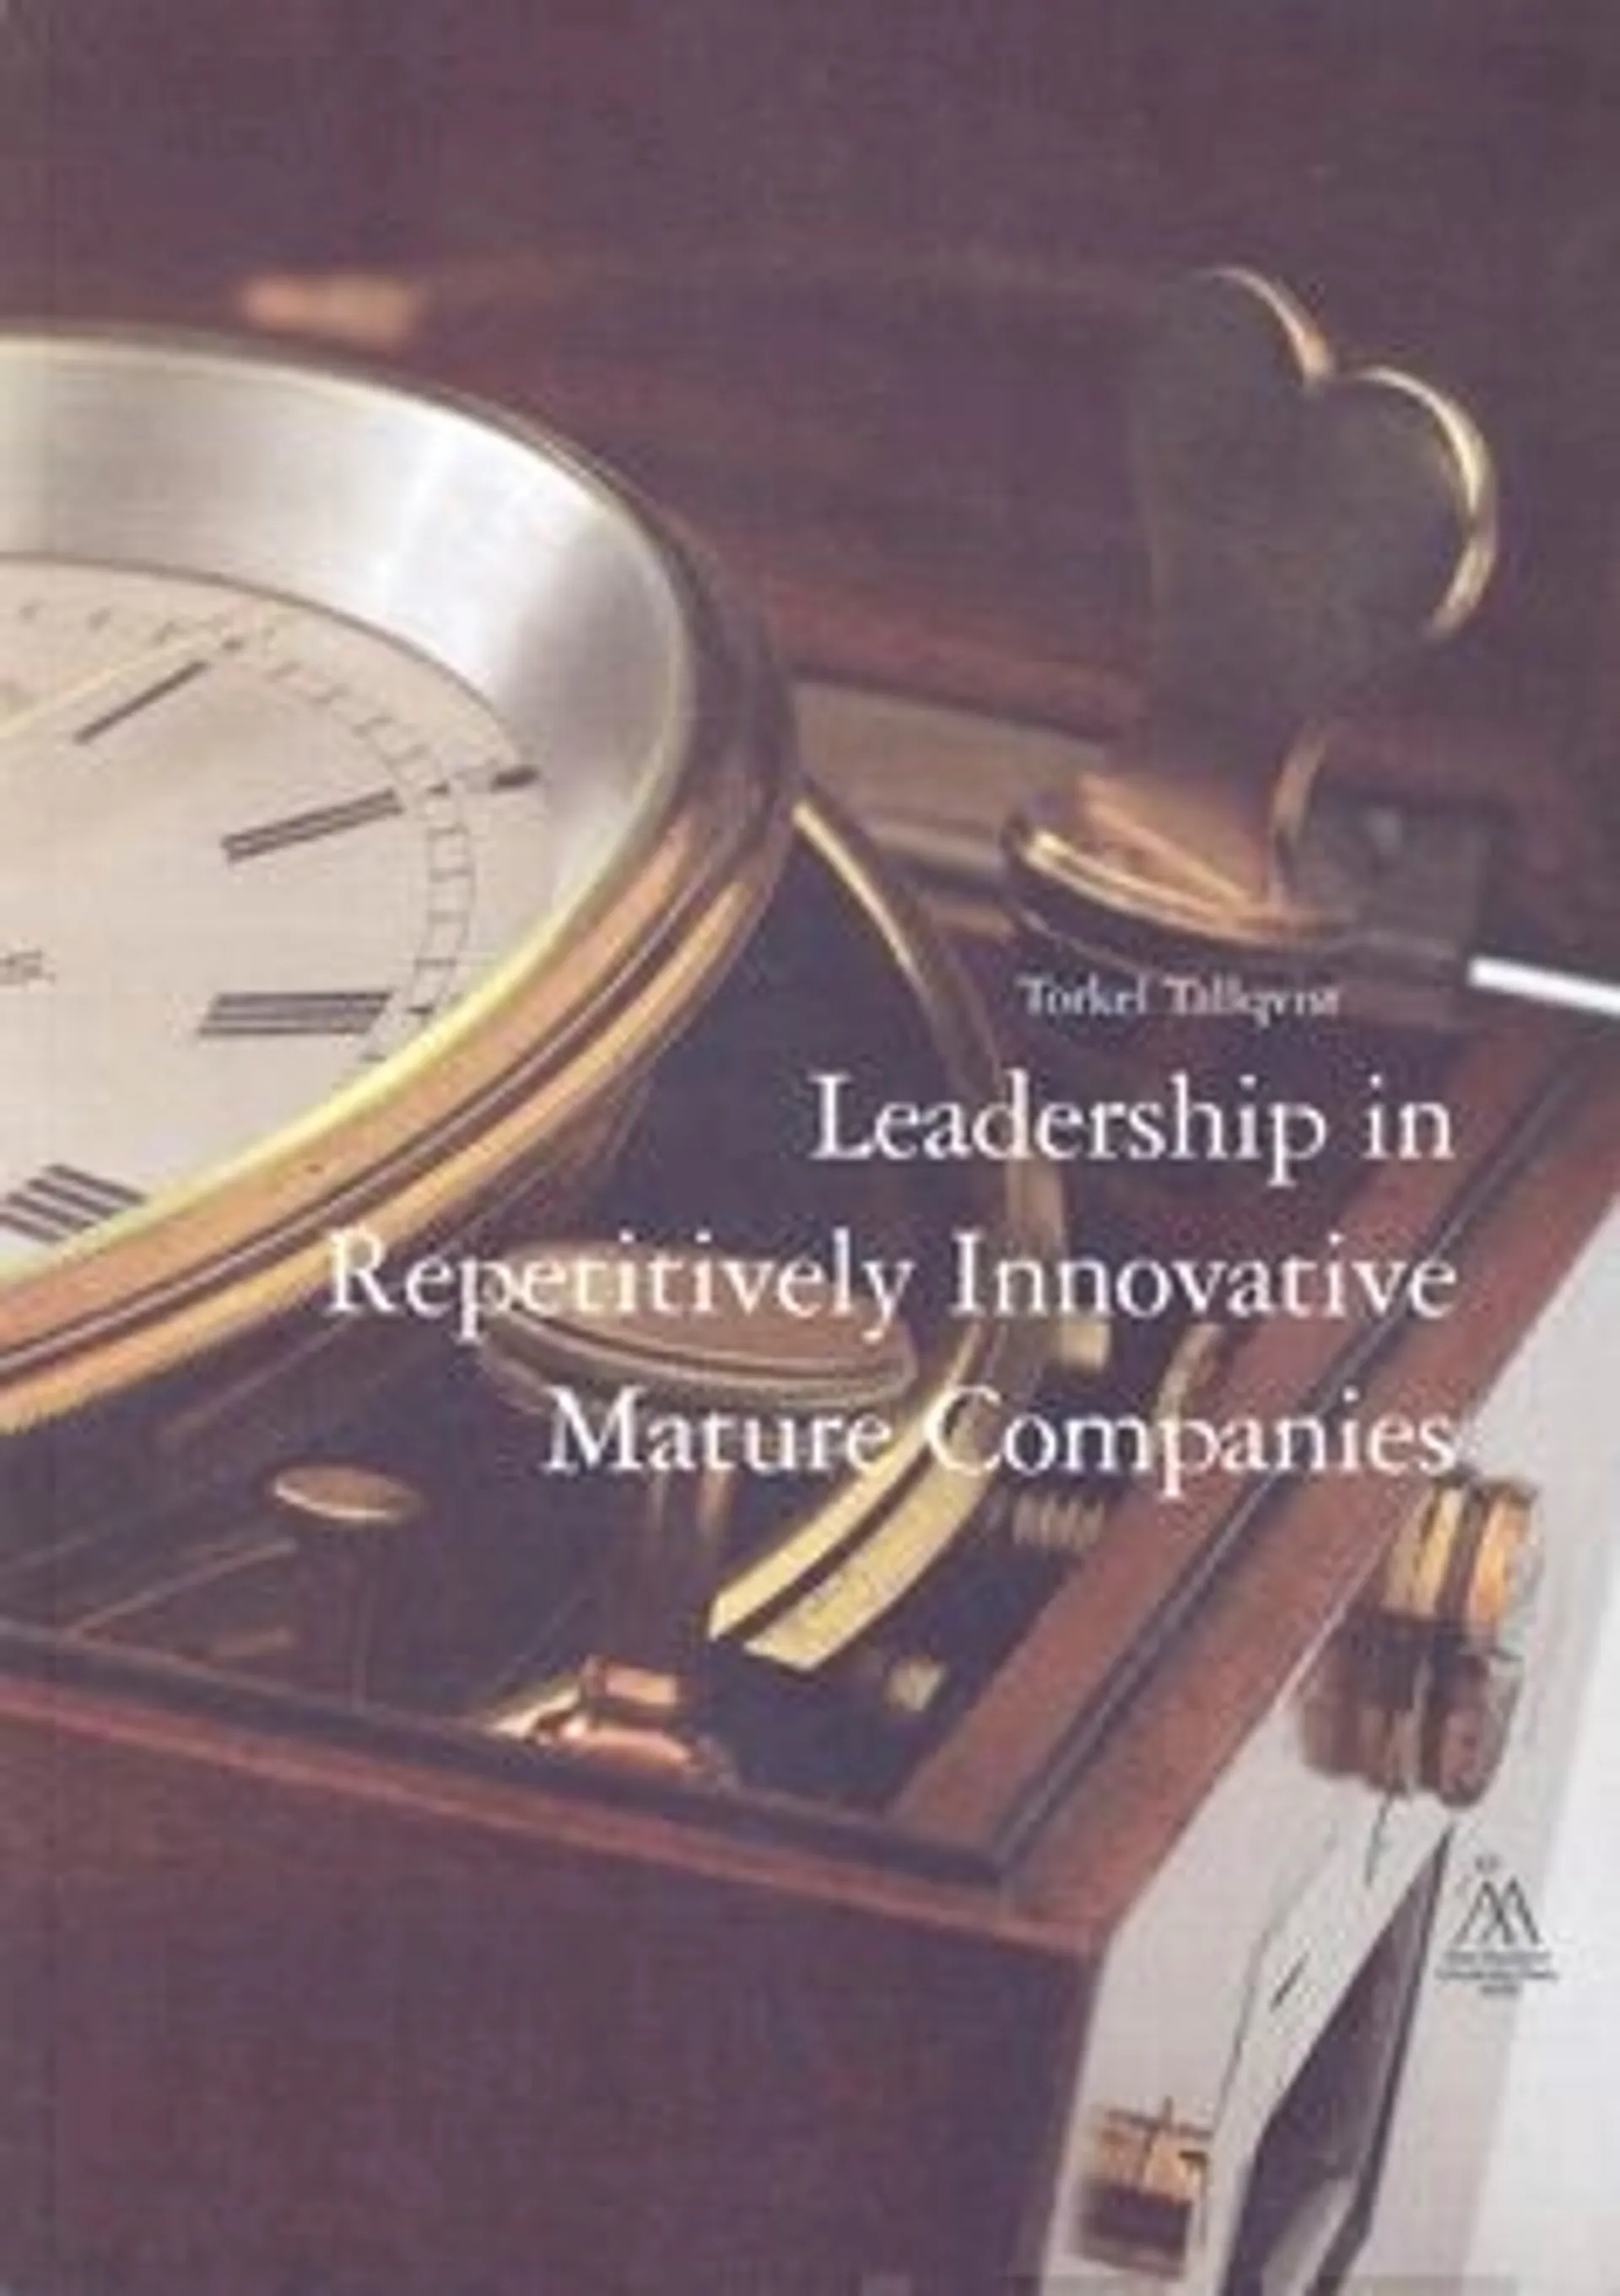 Tallqvist, Leadership in repetitively innovative mature companies